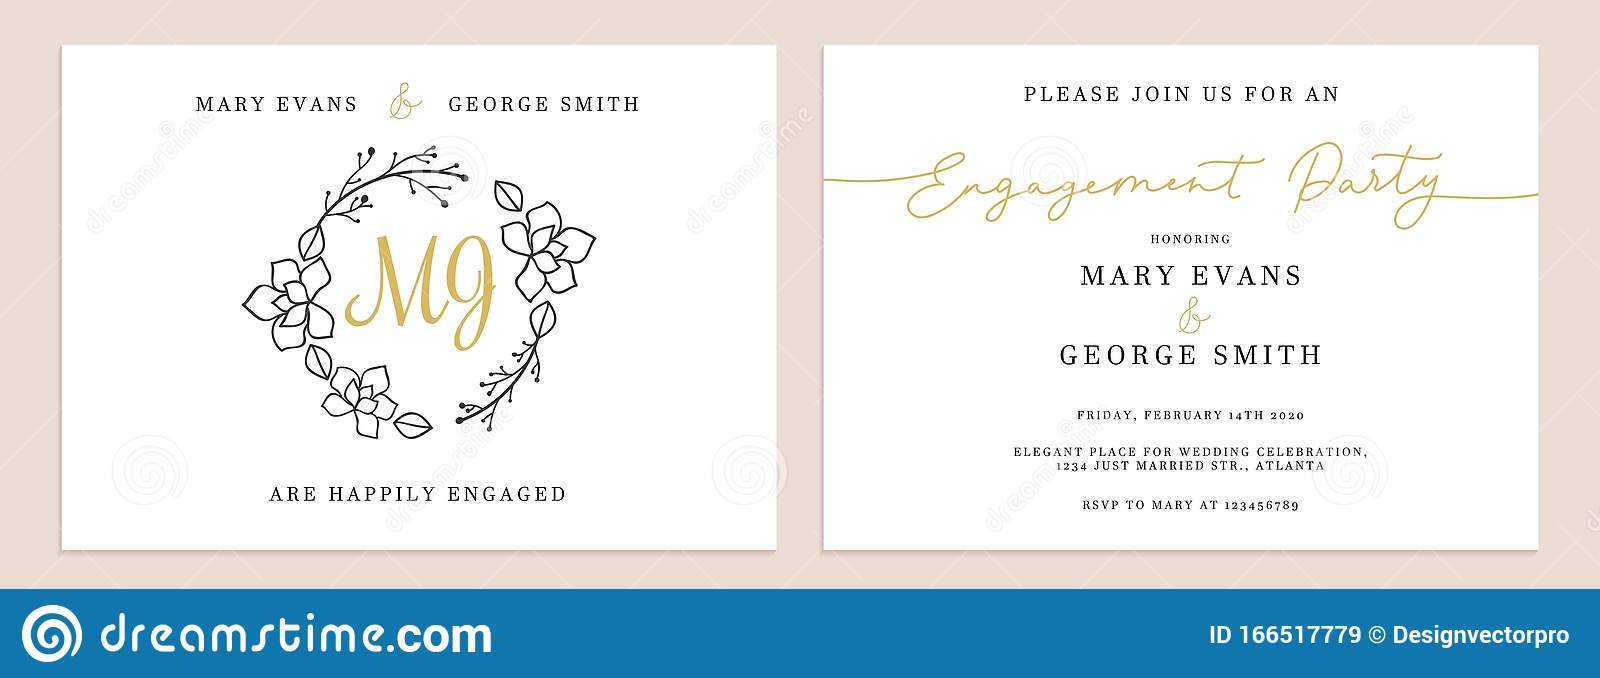 Set Of Wedding Invitation Cards Design Templates Stock In Celebrate It Templates Place Cards